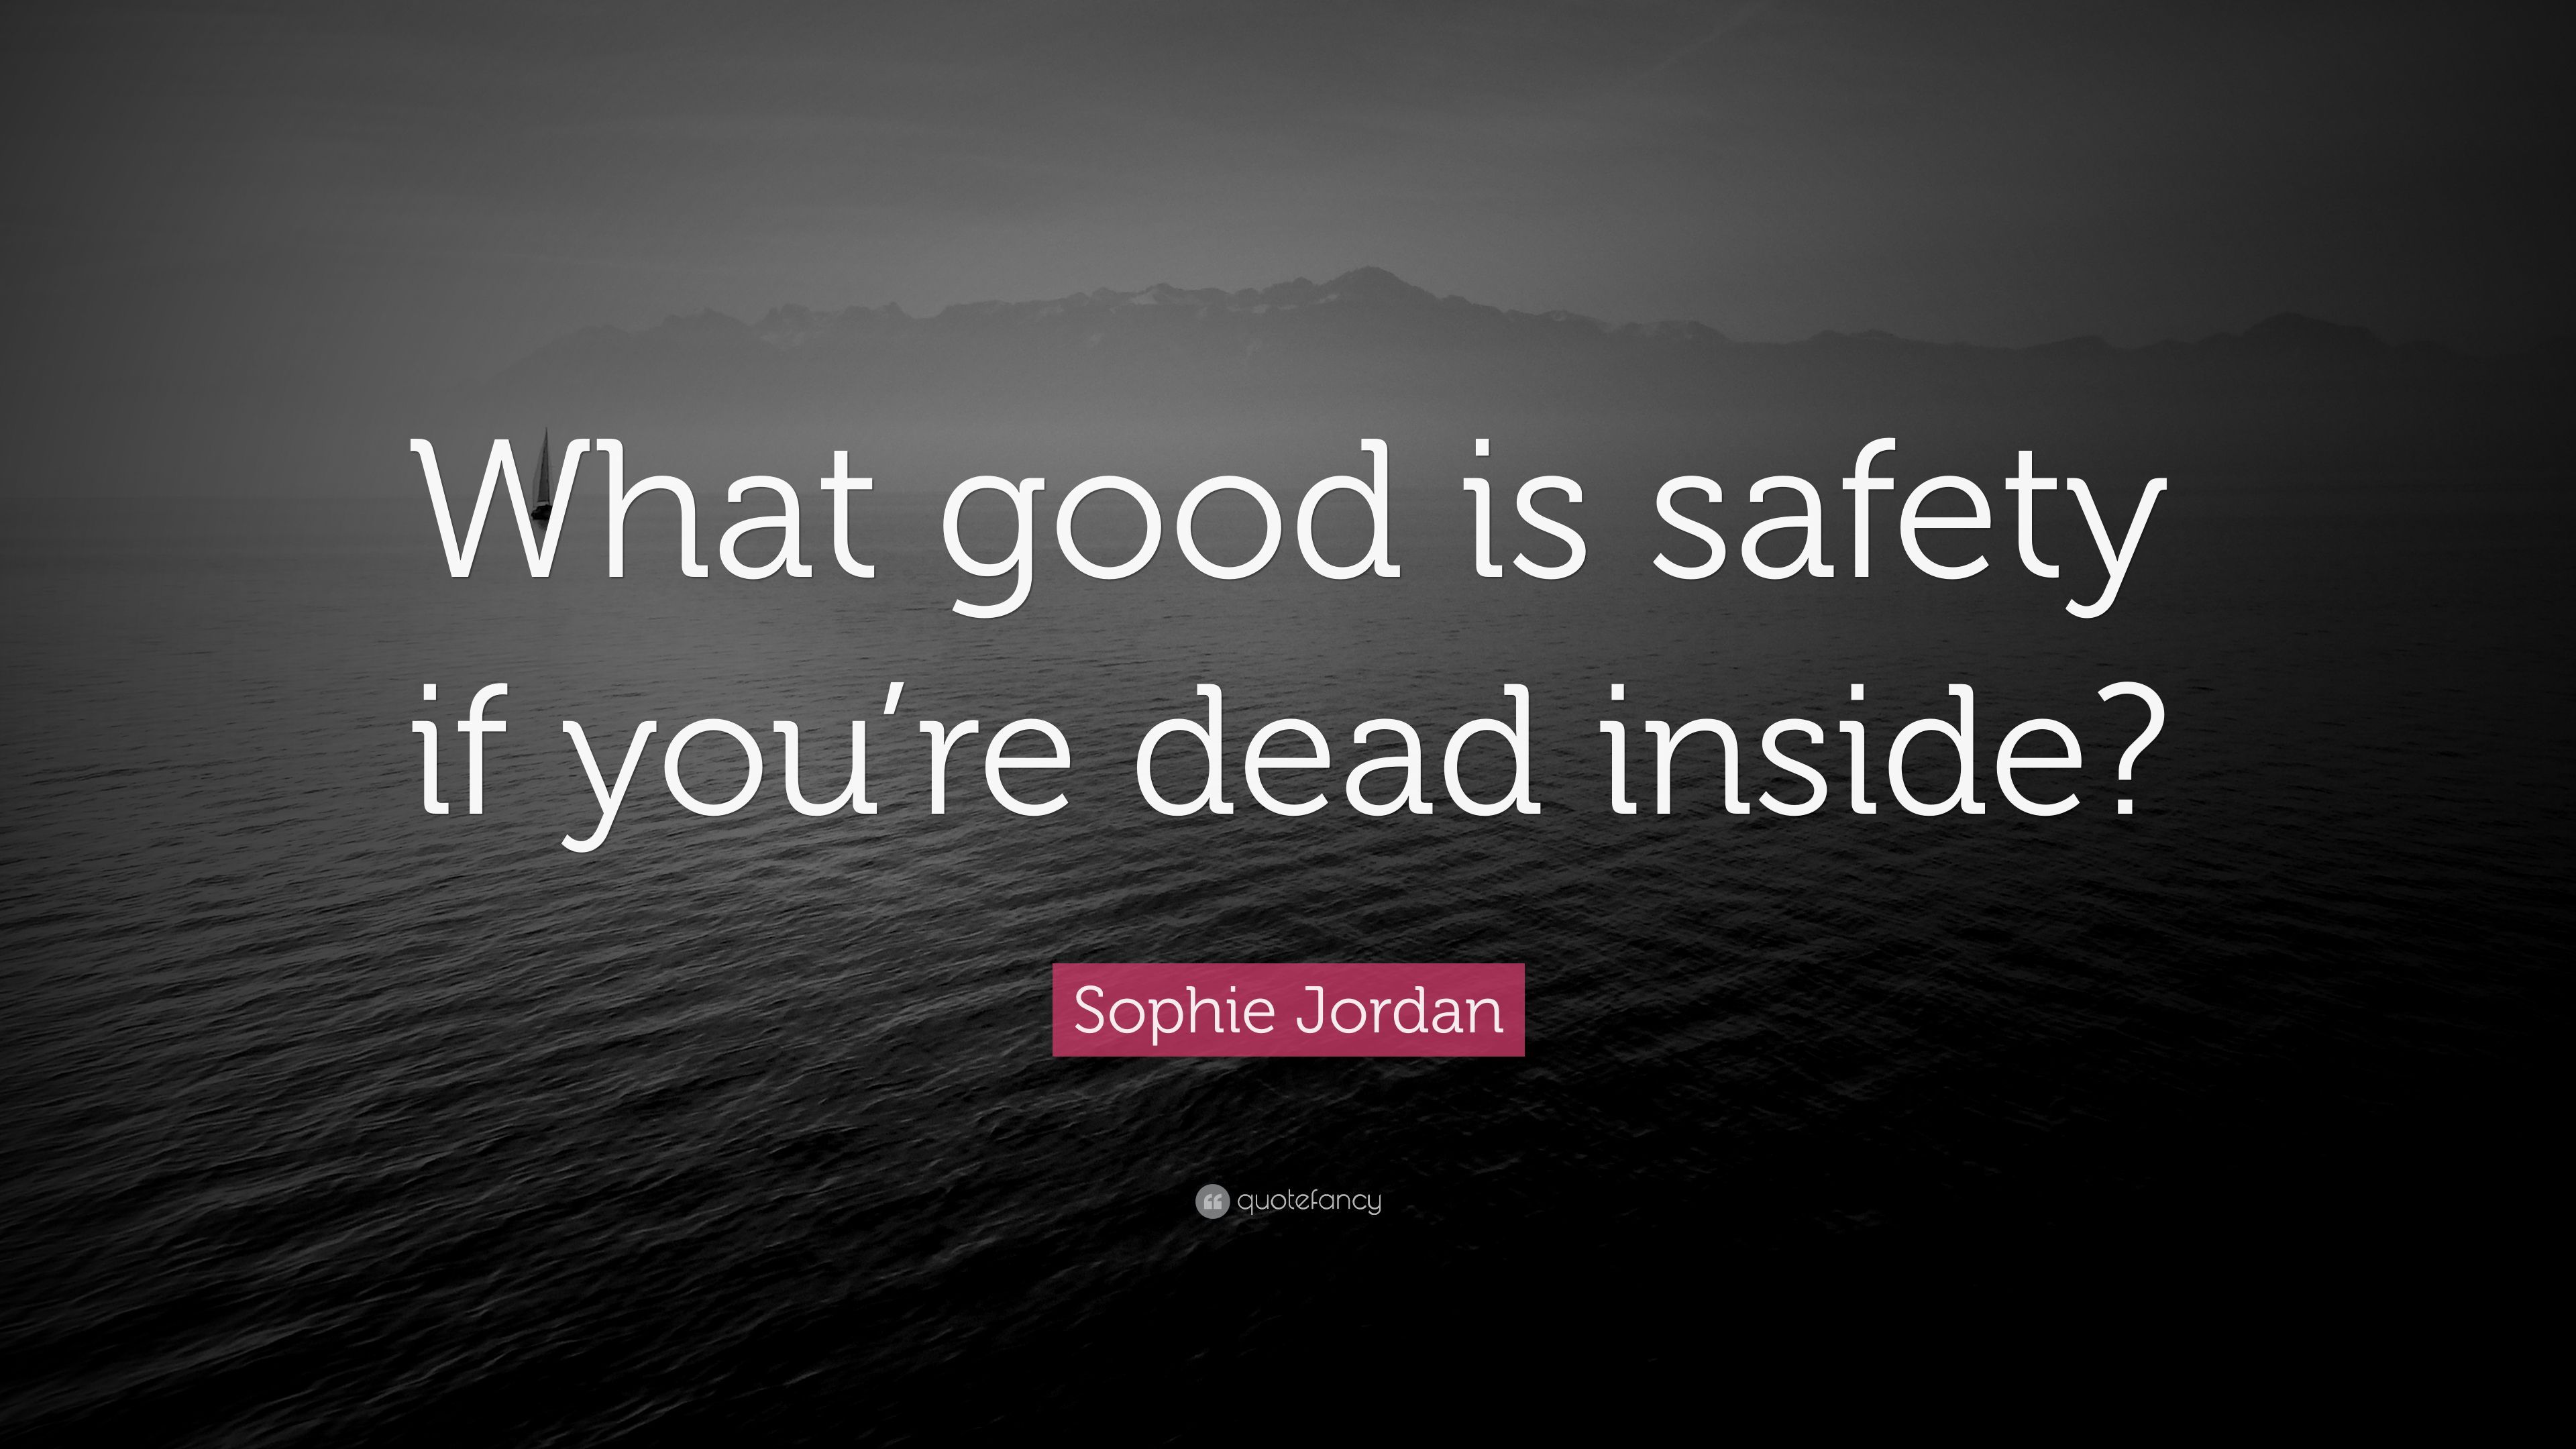 Sophie Jordan Quote: “What good is safety if you're dead inside